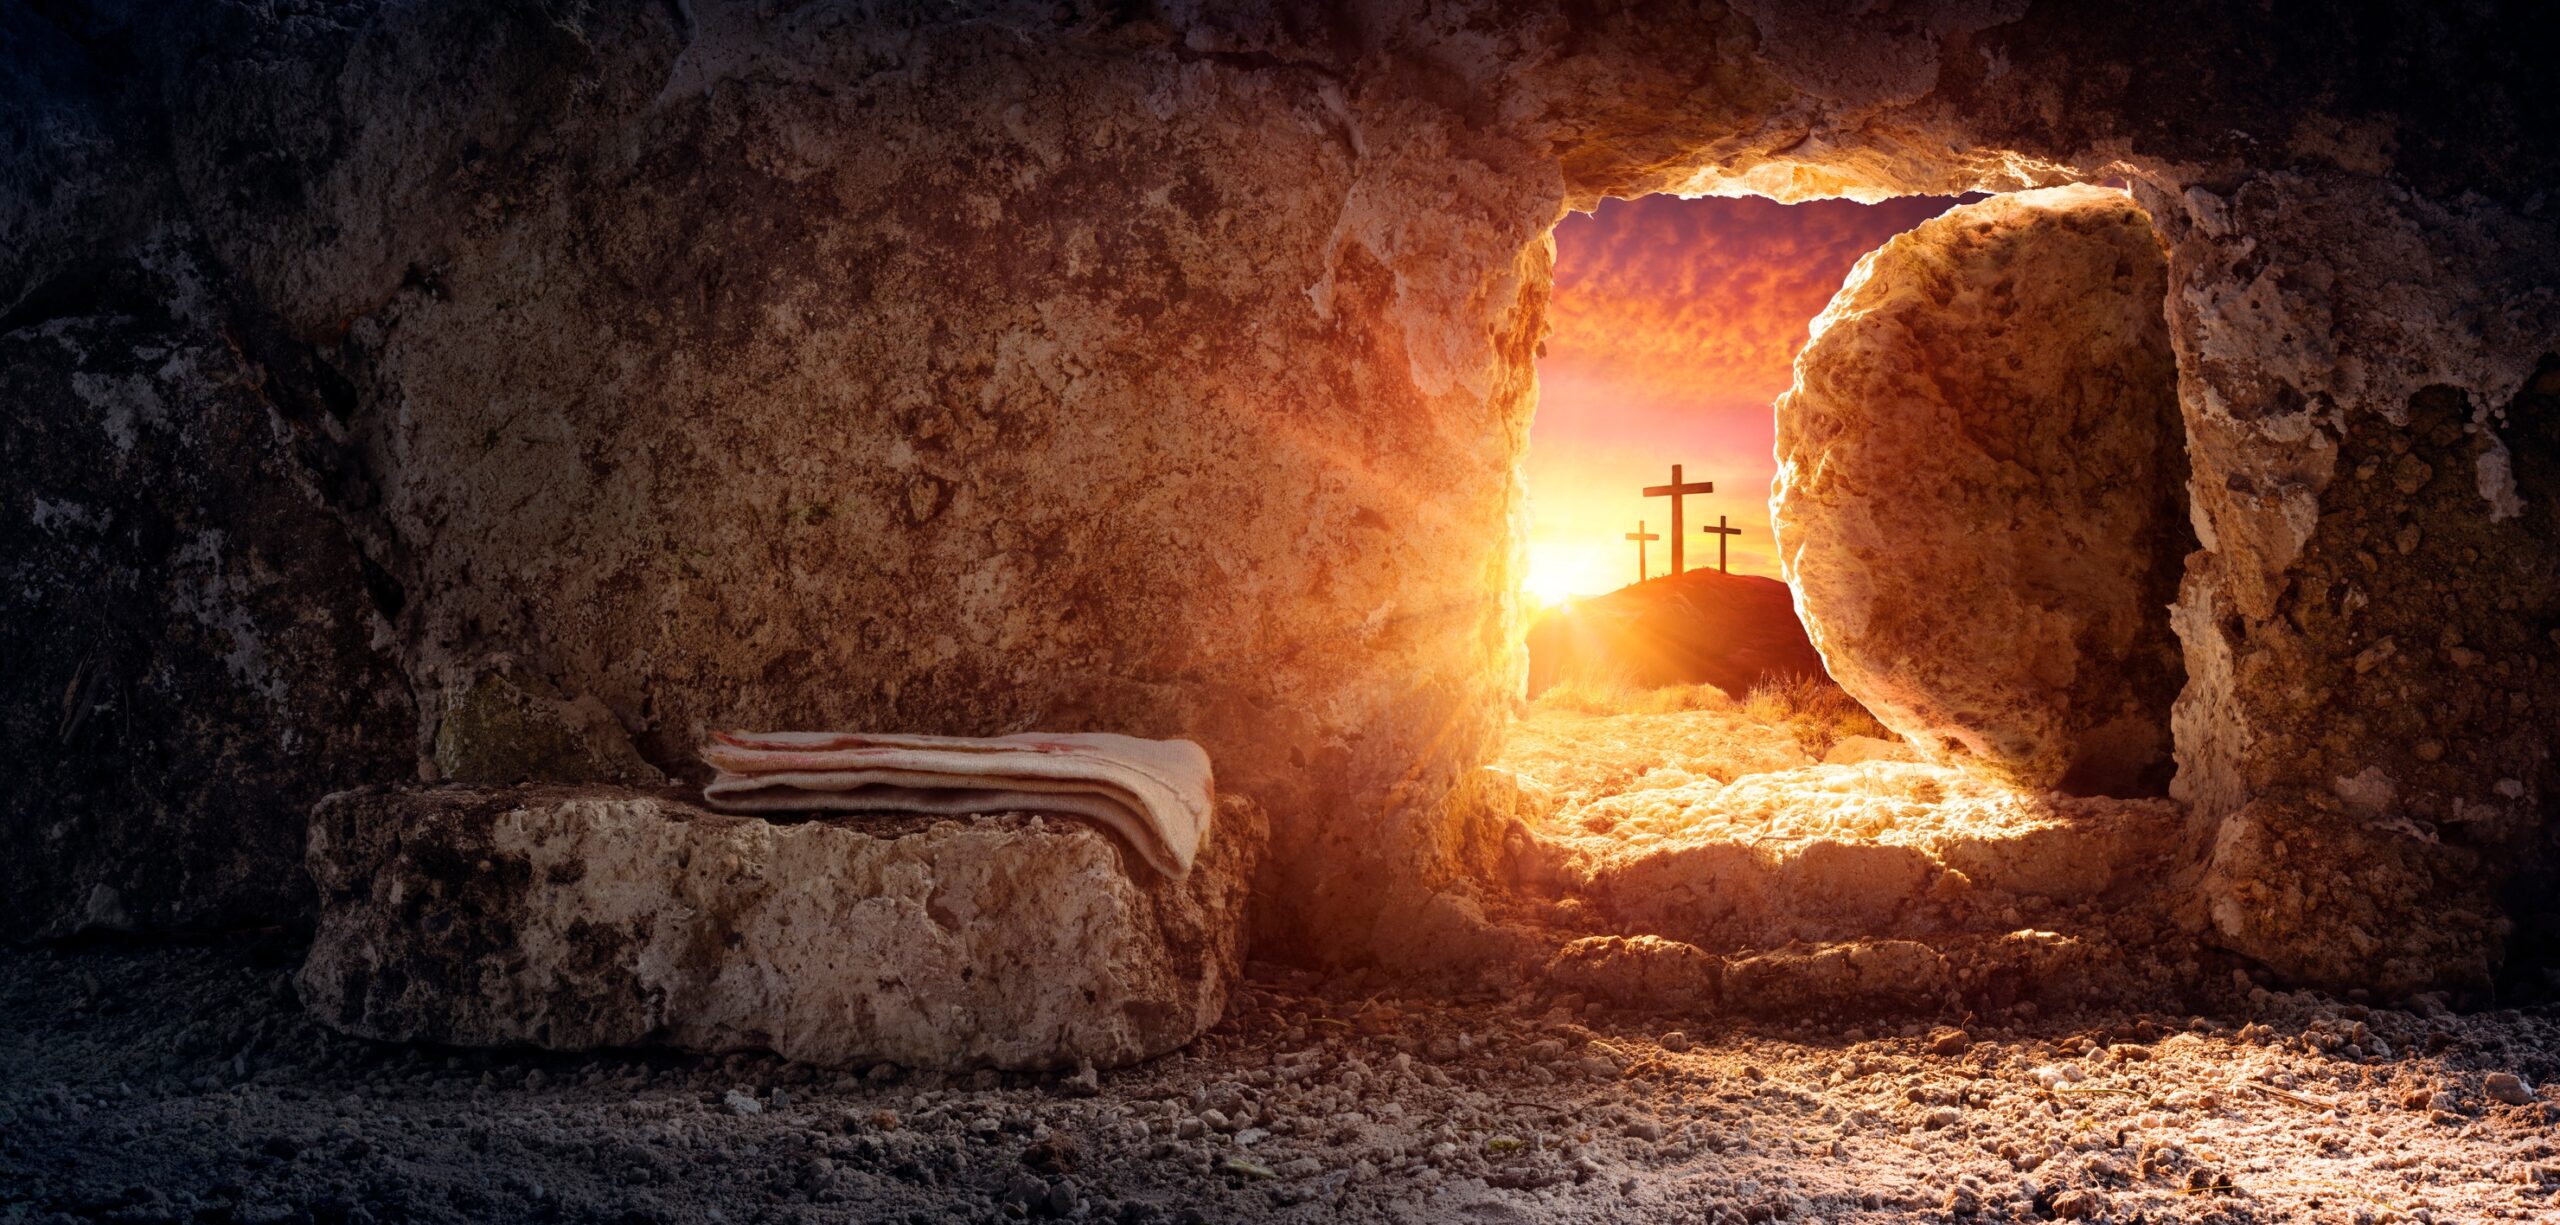 Image from inside of the empty tomb on Easter Sunday.